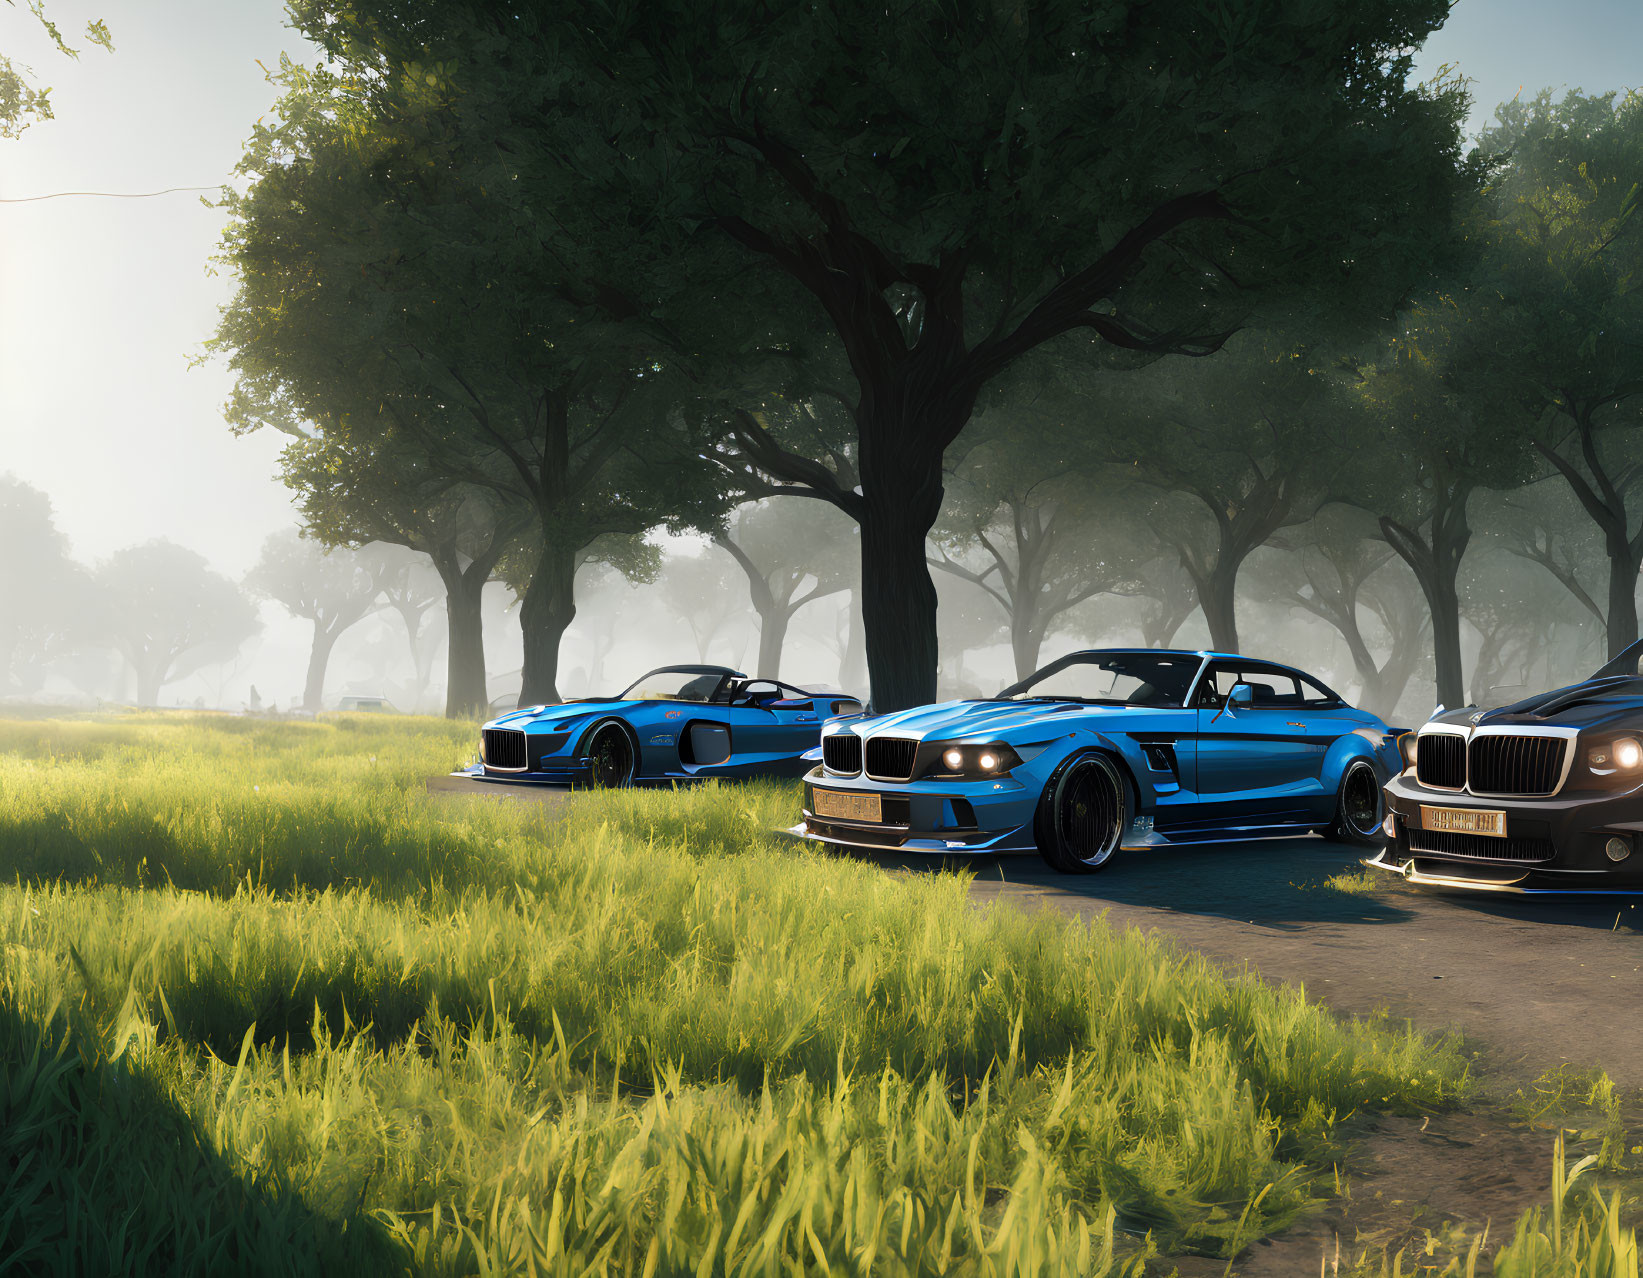 Three Blue Sports Cars Parked in Grassy Field with Misty Tree Backdrop